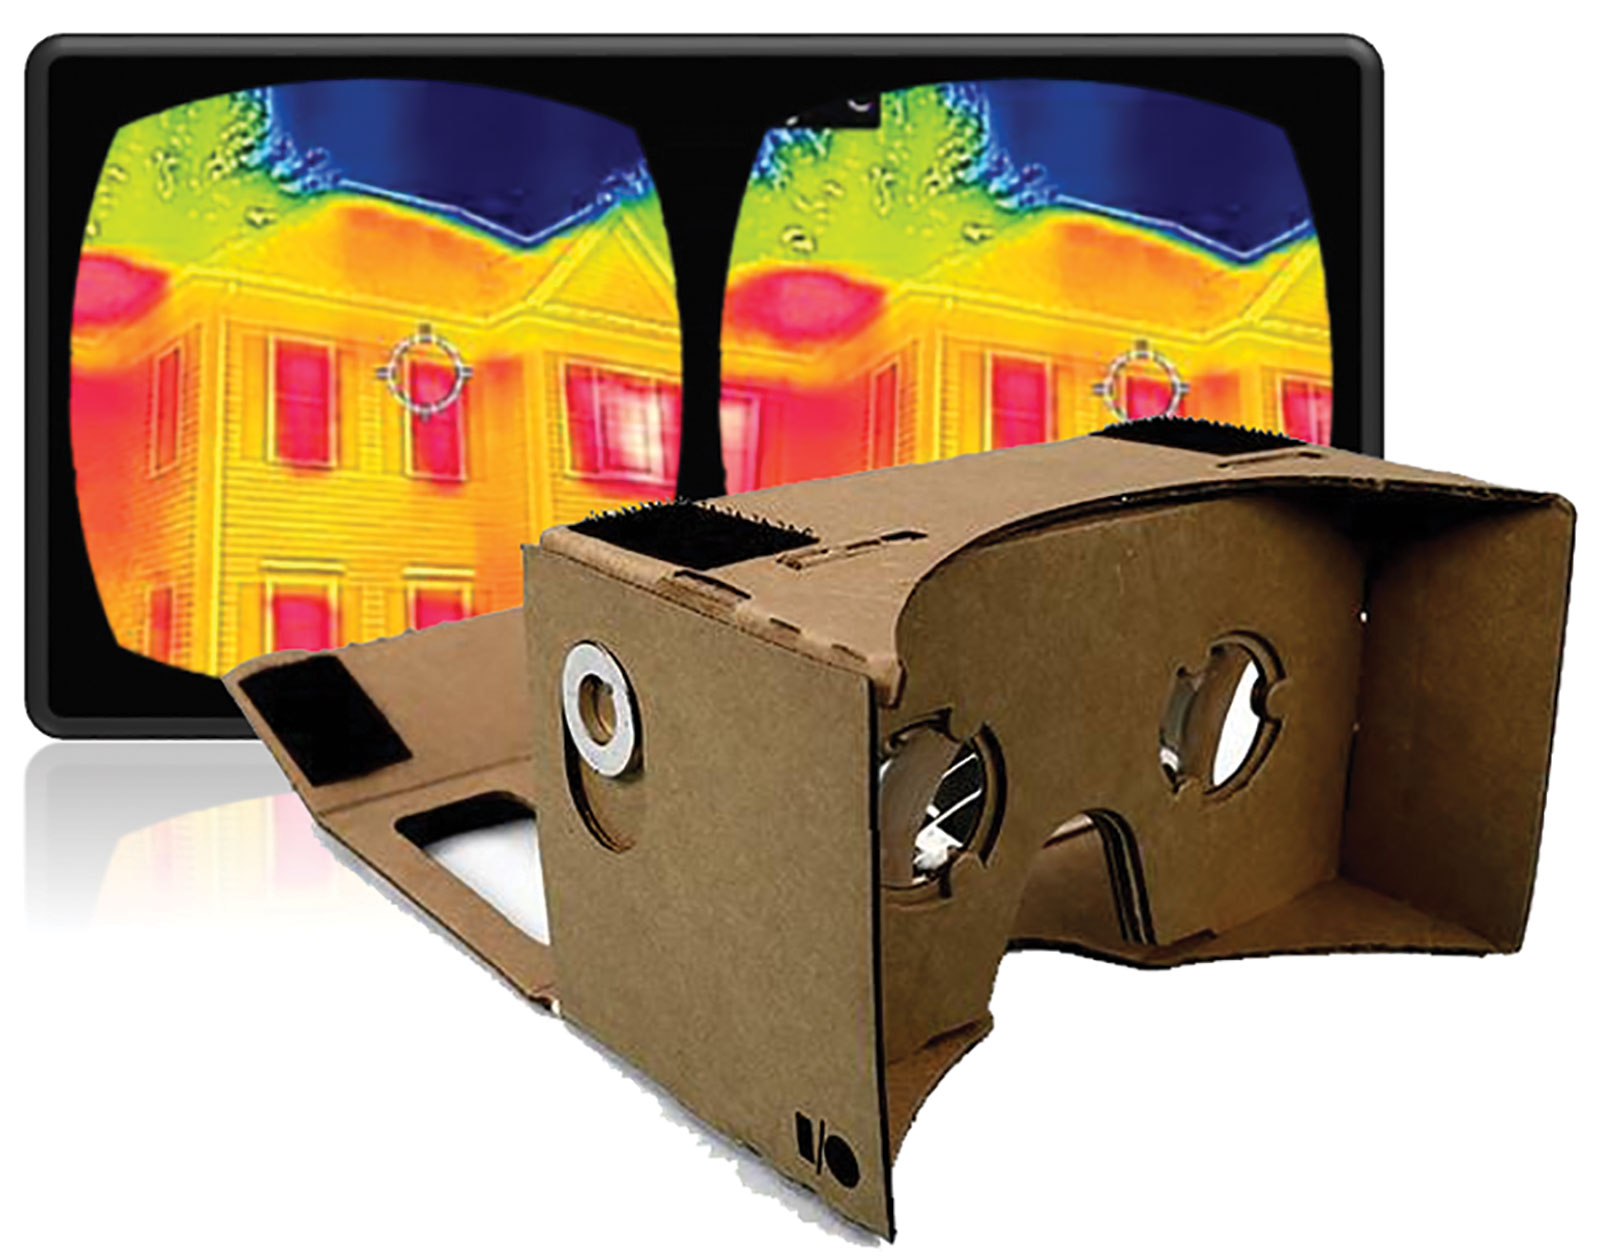 Virtual Infrared Reality can be uploaded to Google Maps so the public can experience it using a VR viewer, such as Google’s Cardboard Viewer.